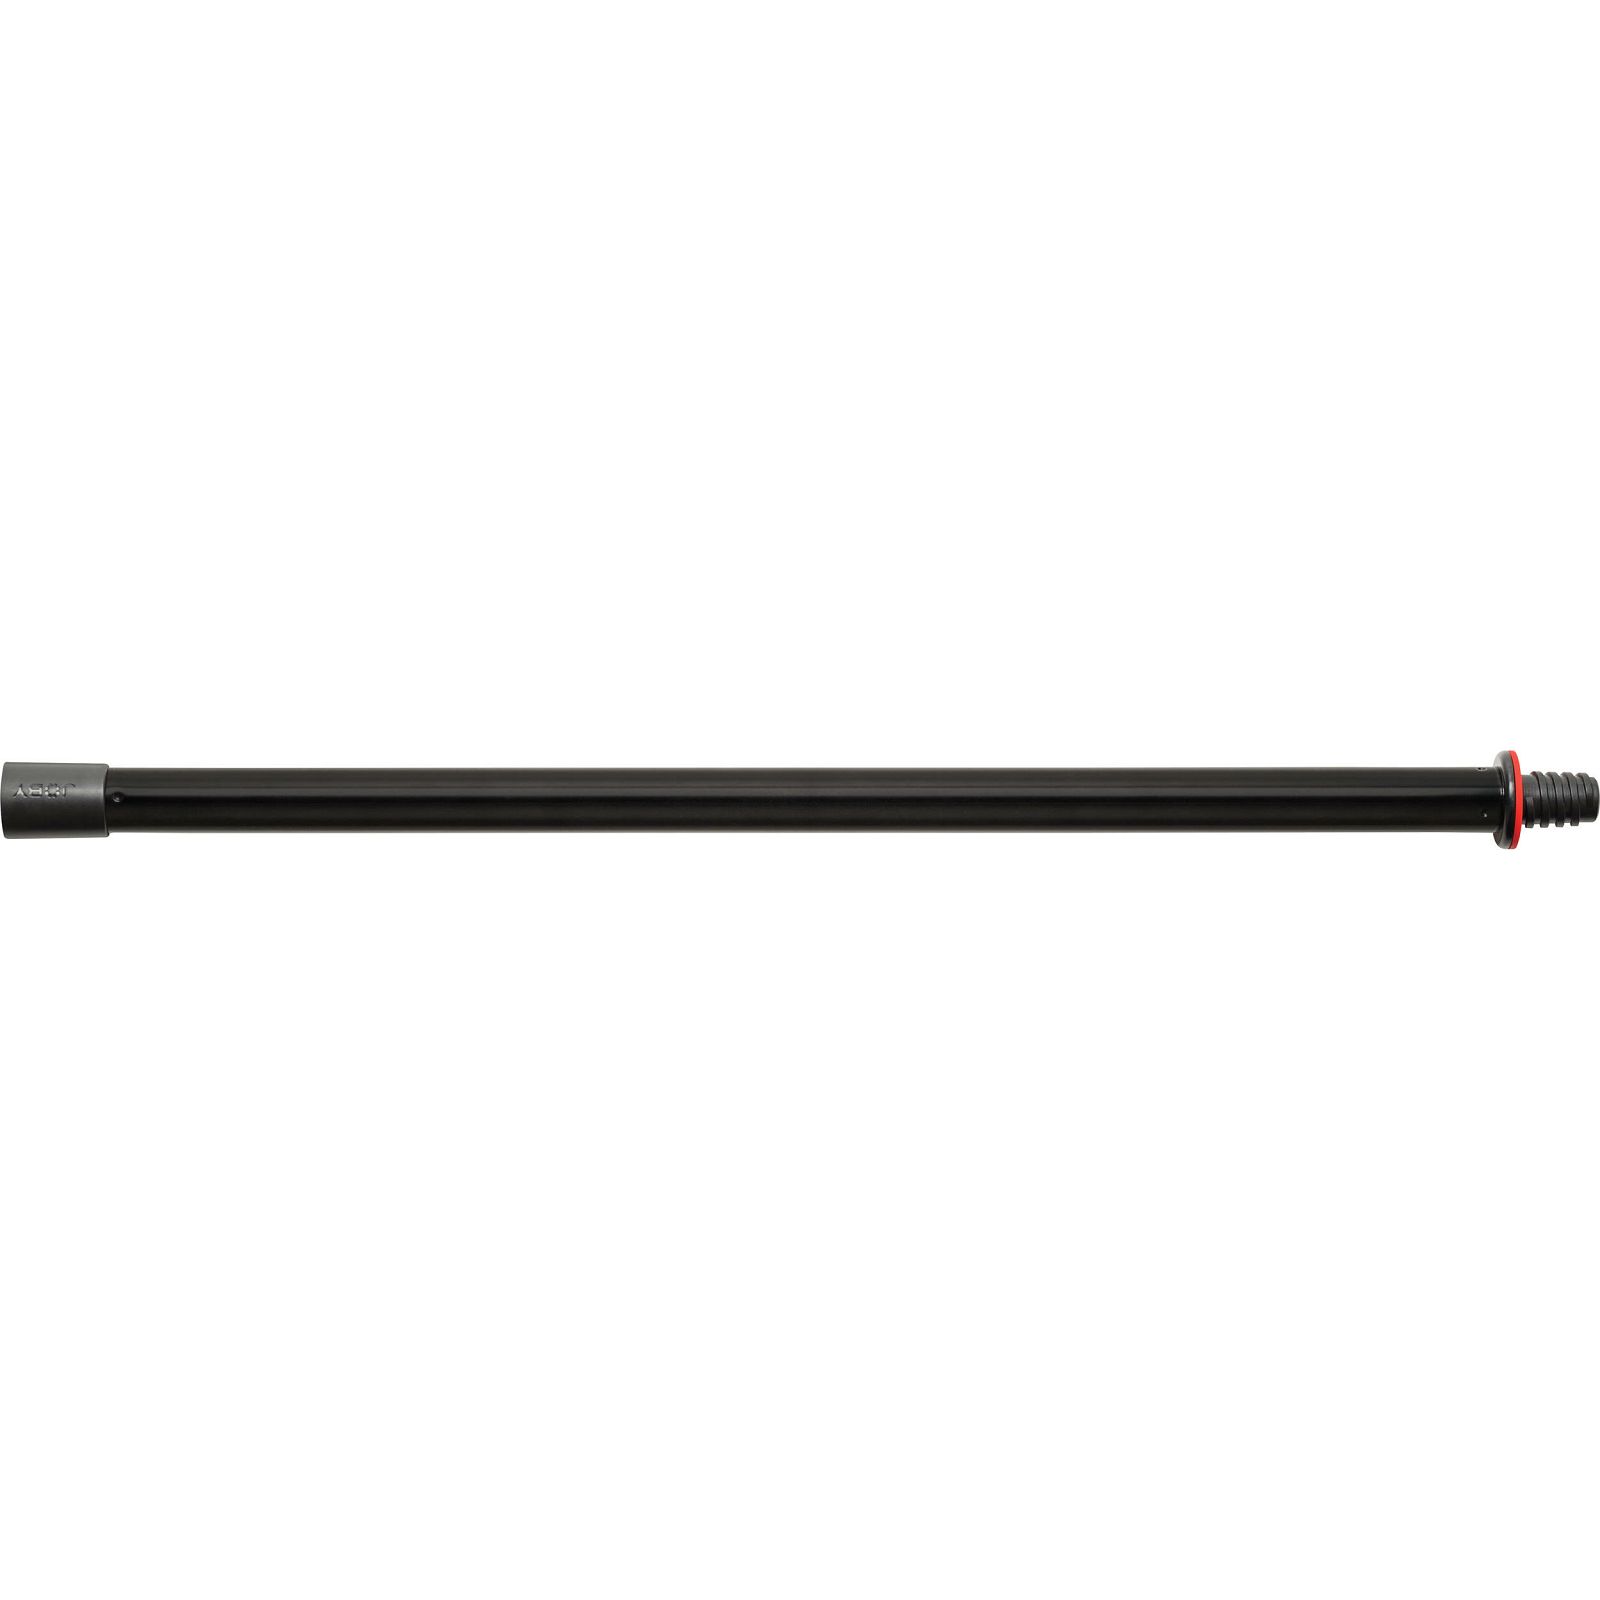 Joby Action Grip & Pole (Black/Red)